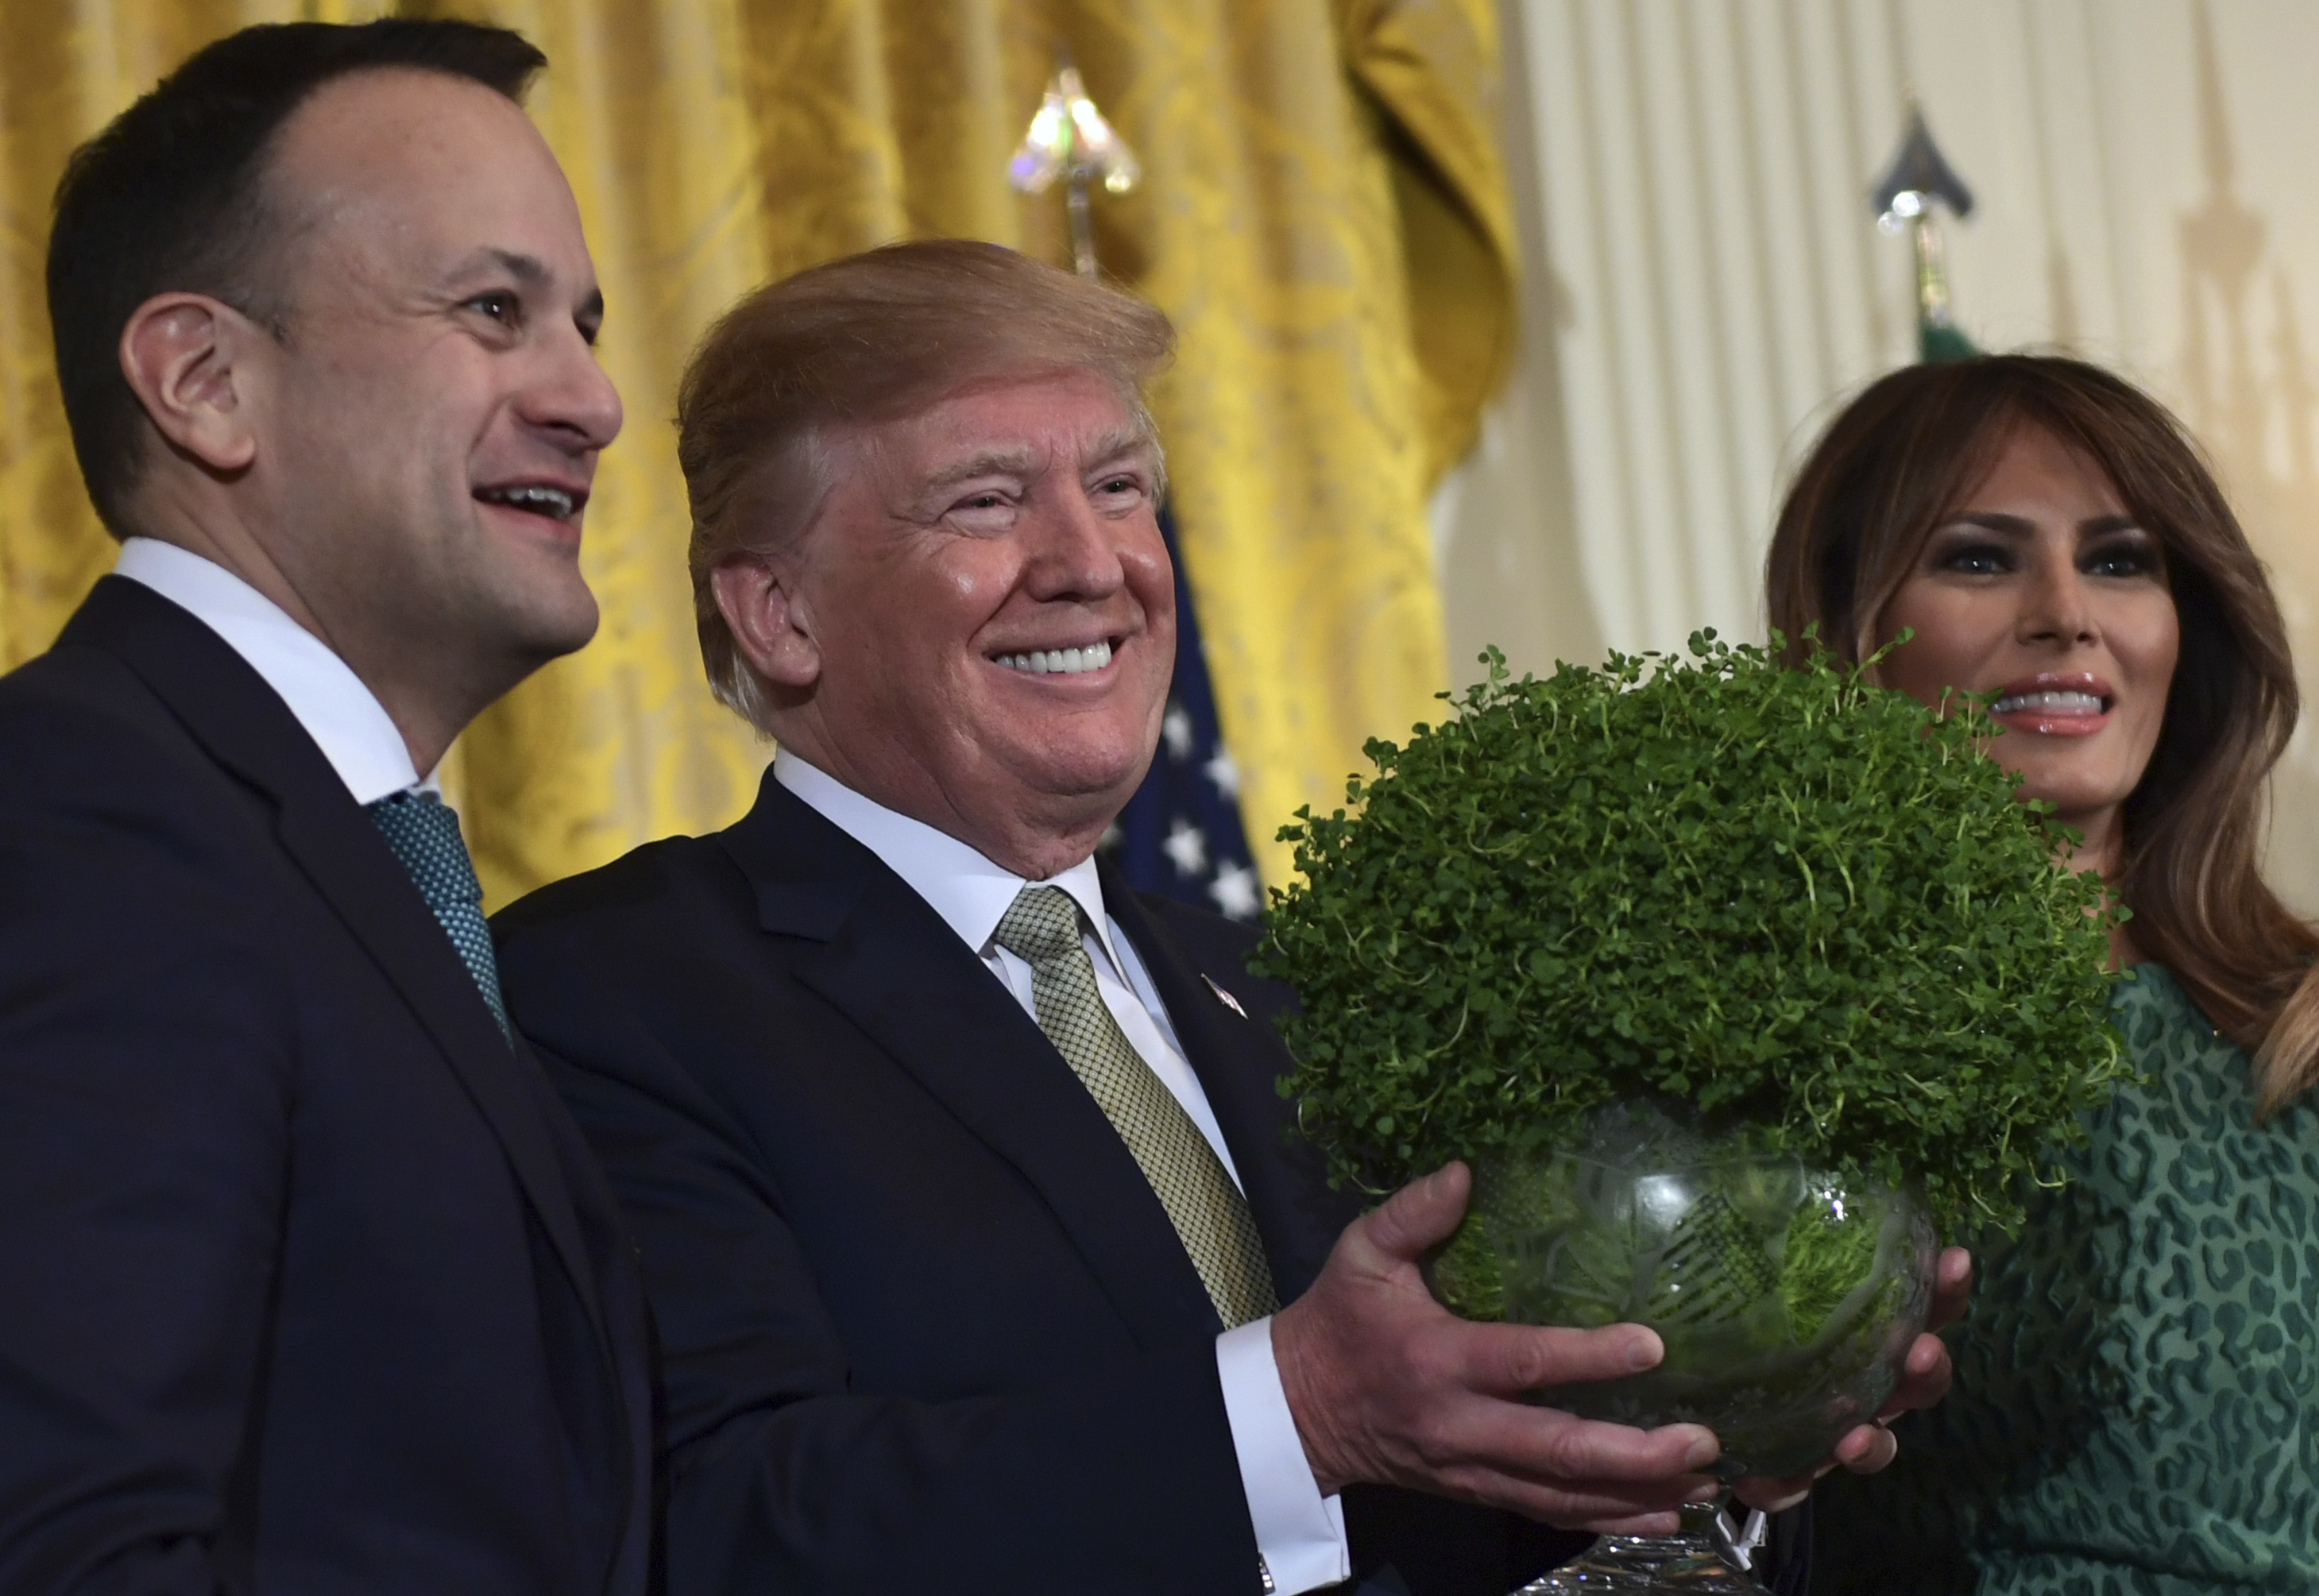 President Donald Trump, center, smiles as he is presented with a traditional gift of a bowl of shamrocks from Irish Prime Minister Leo Varadkar, left, during a St. Patrick's Day reception in the East Room of the White House in Washington, Thursday, March 15, 2018. First lady Melania Trump stands at right. (AP Photo/Susan Walsh)